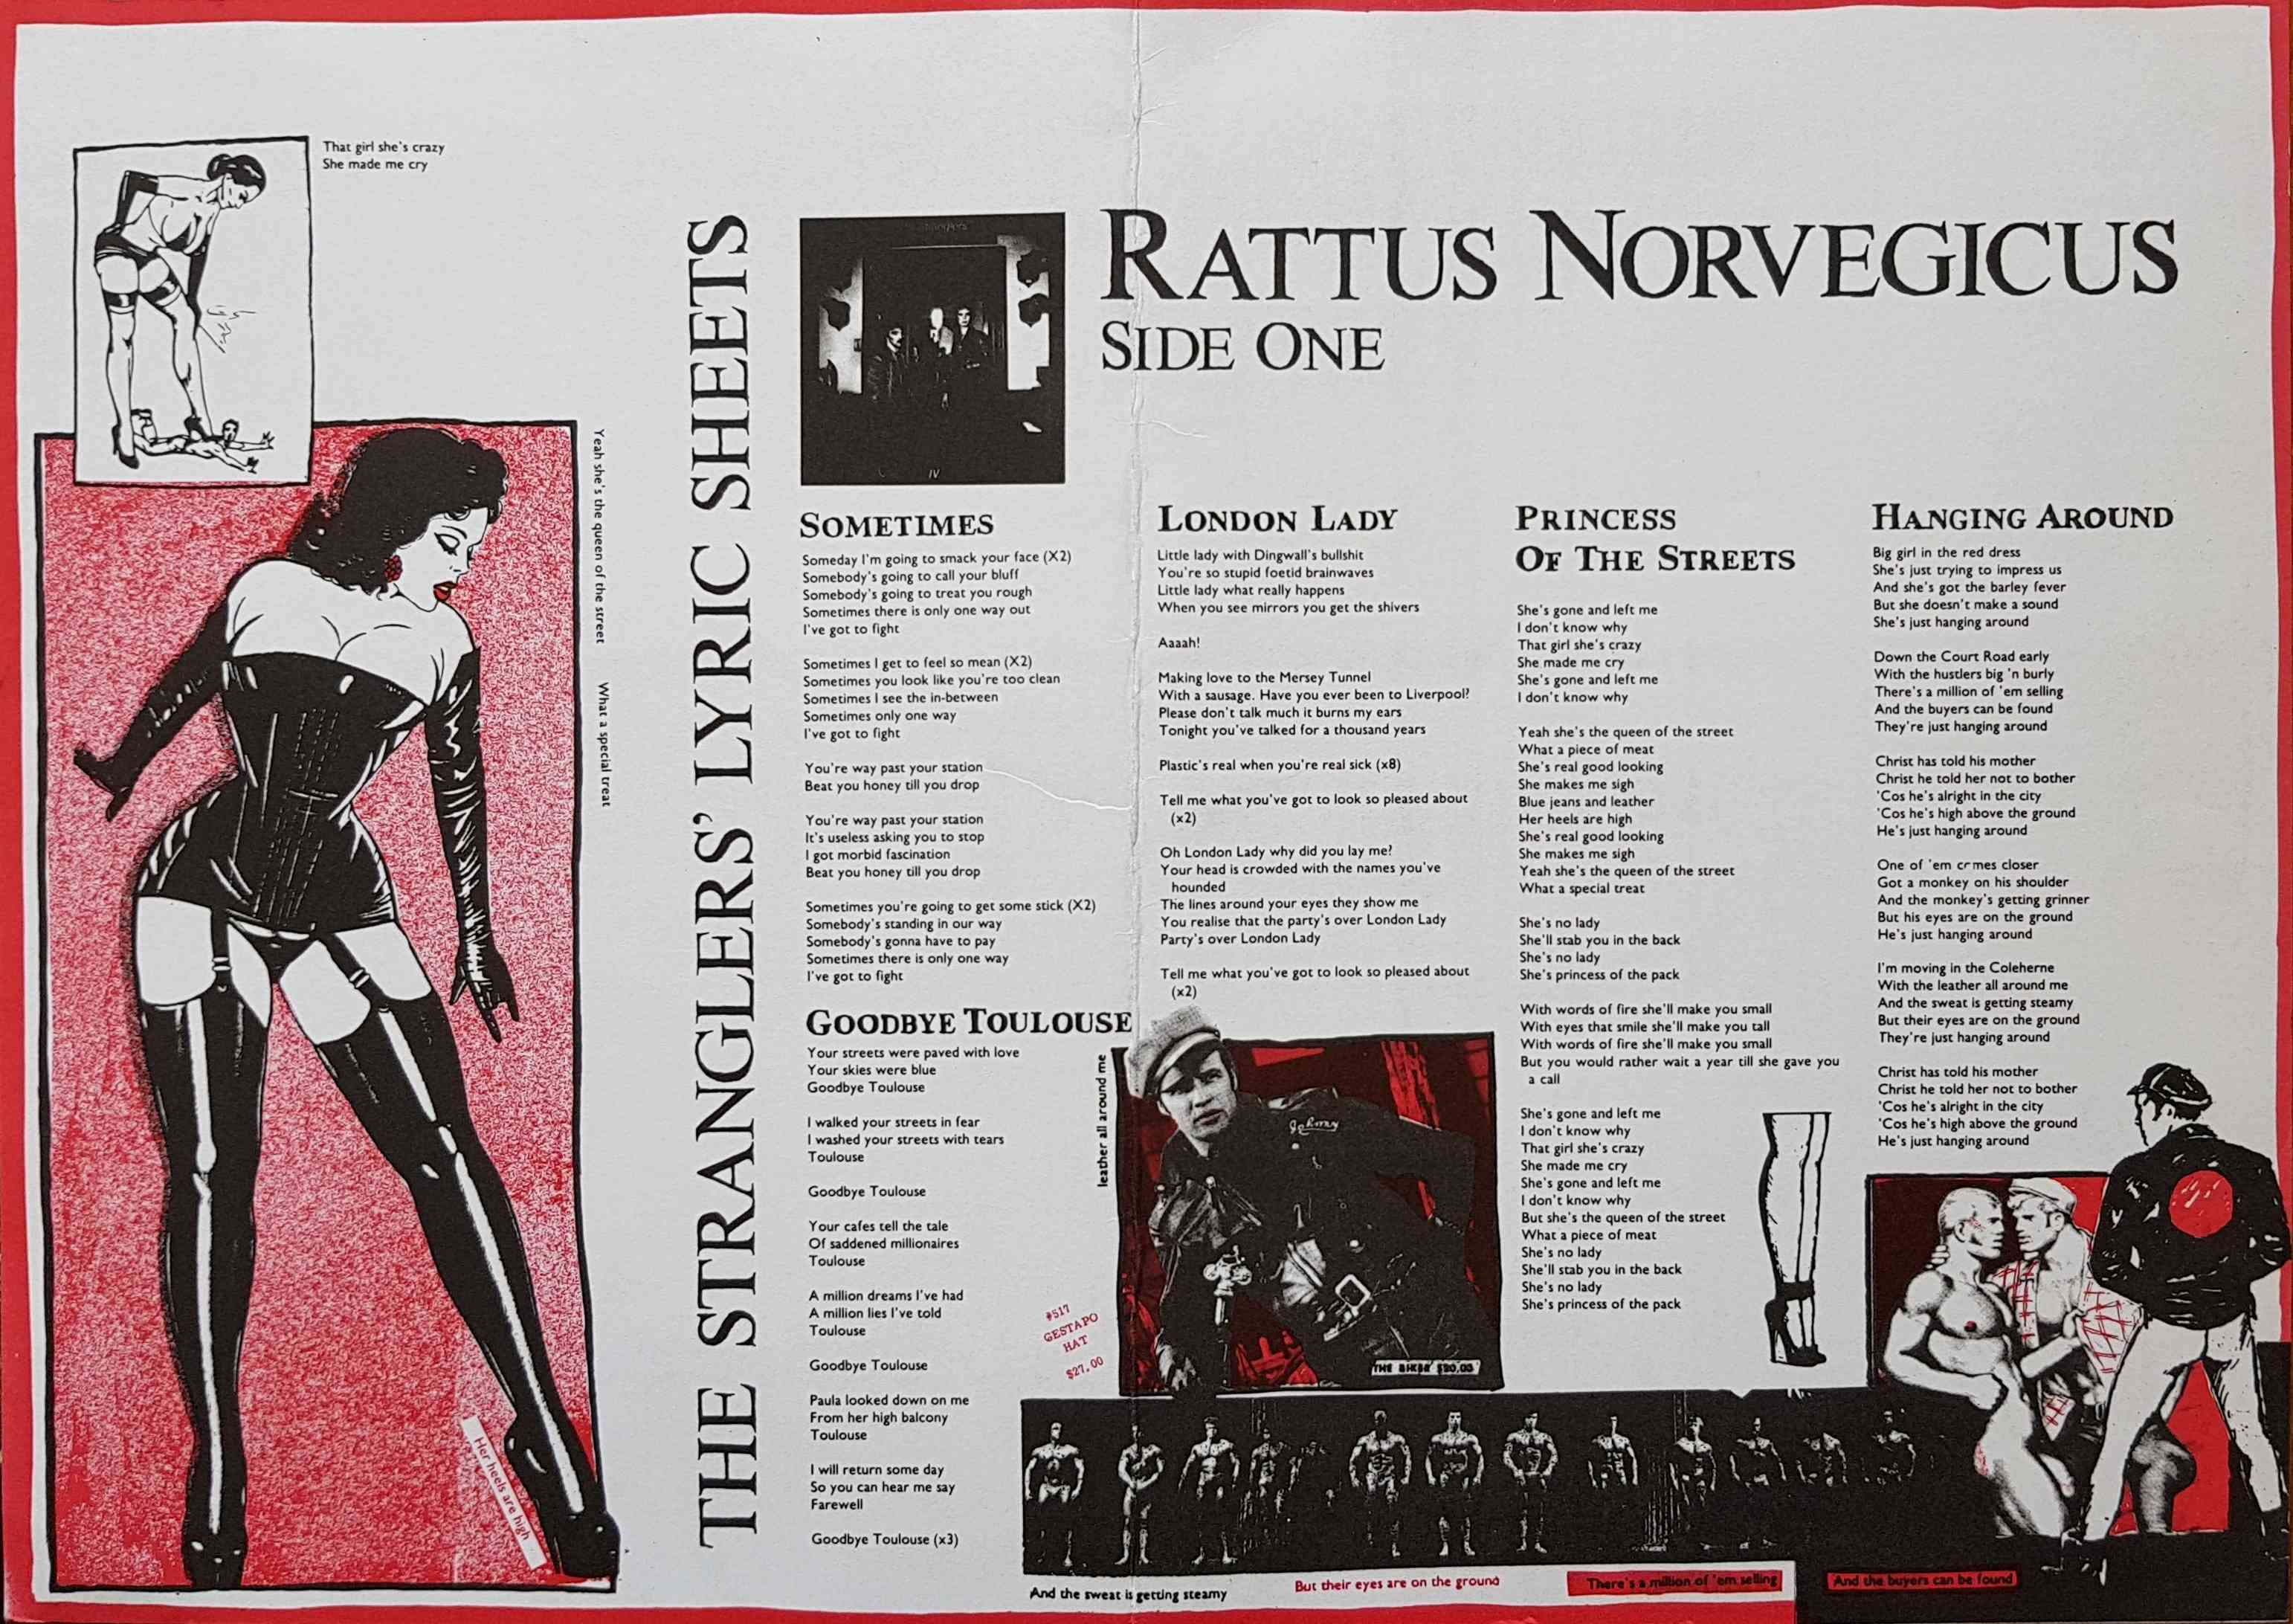 Picture of Rattus Norvegicus lyric sheets by artist The Stranglers from The Stranglers books